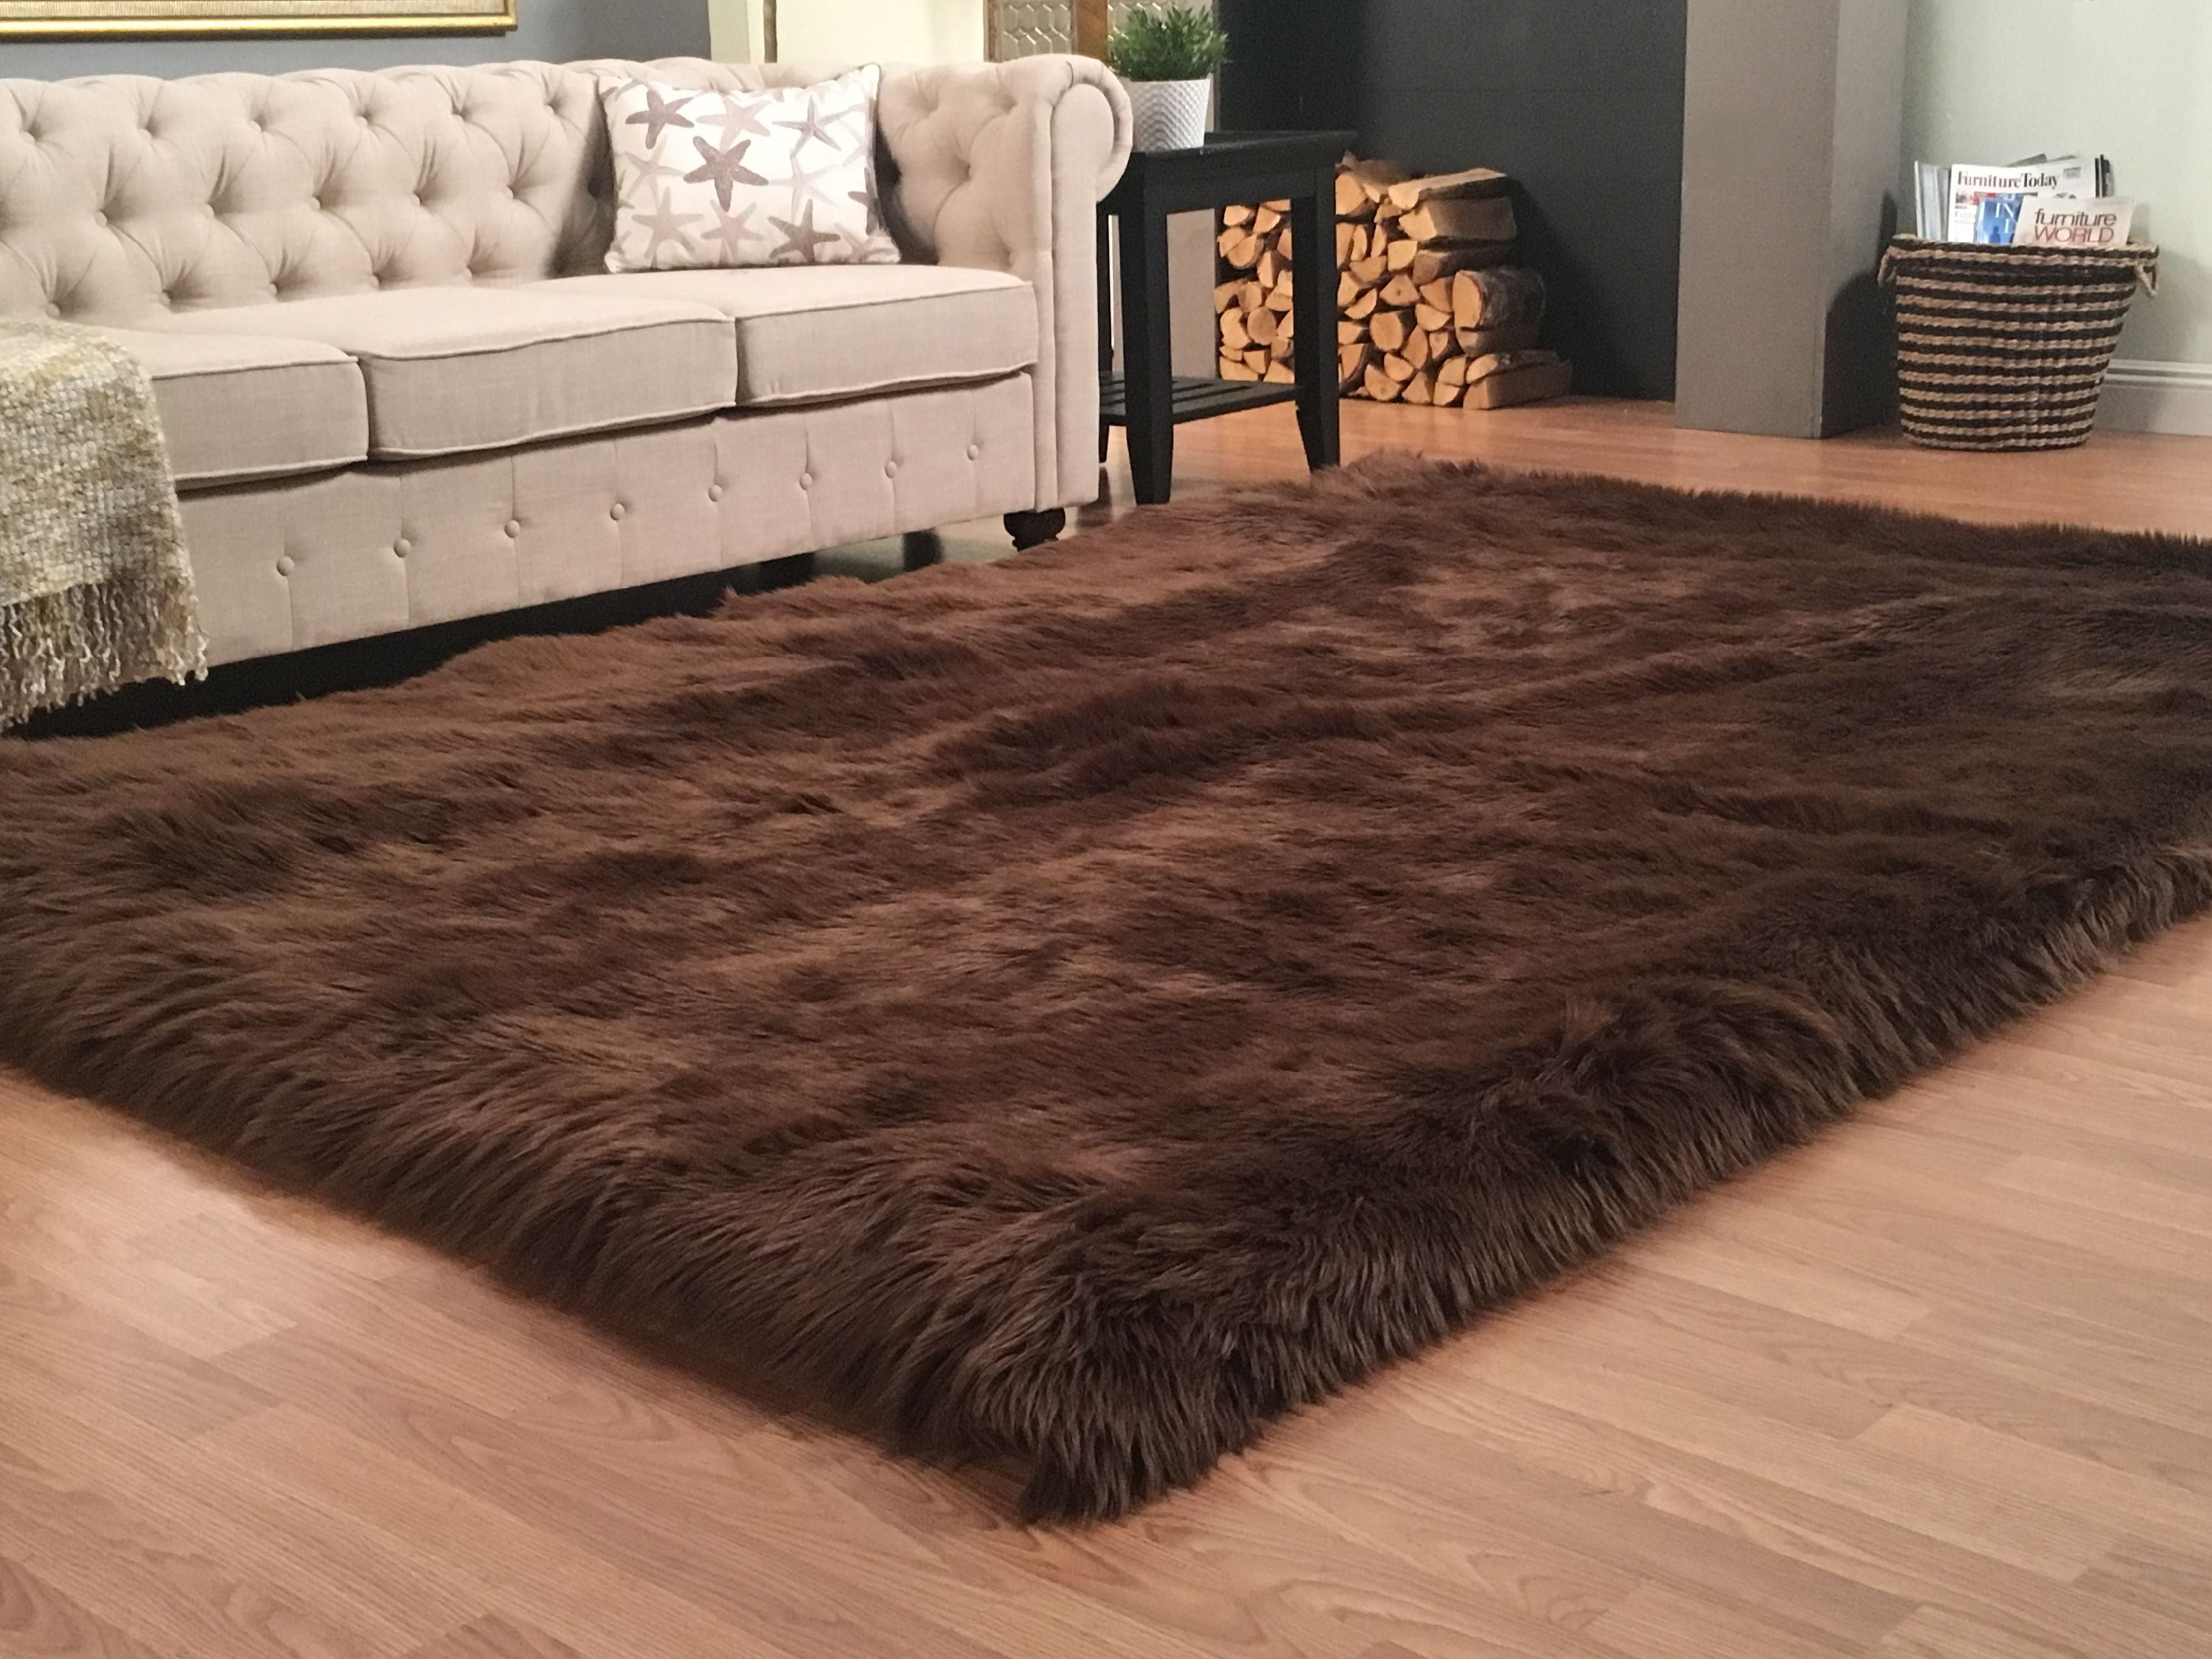 Oval Faux Wolf Skin Ultra Suede Non Slip Back Fur Accents USA Accent Throw Rug Plush Shag Area Rug Premium Faux Fur Coyote 3'x5' Thick Natural Golden Brown 